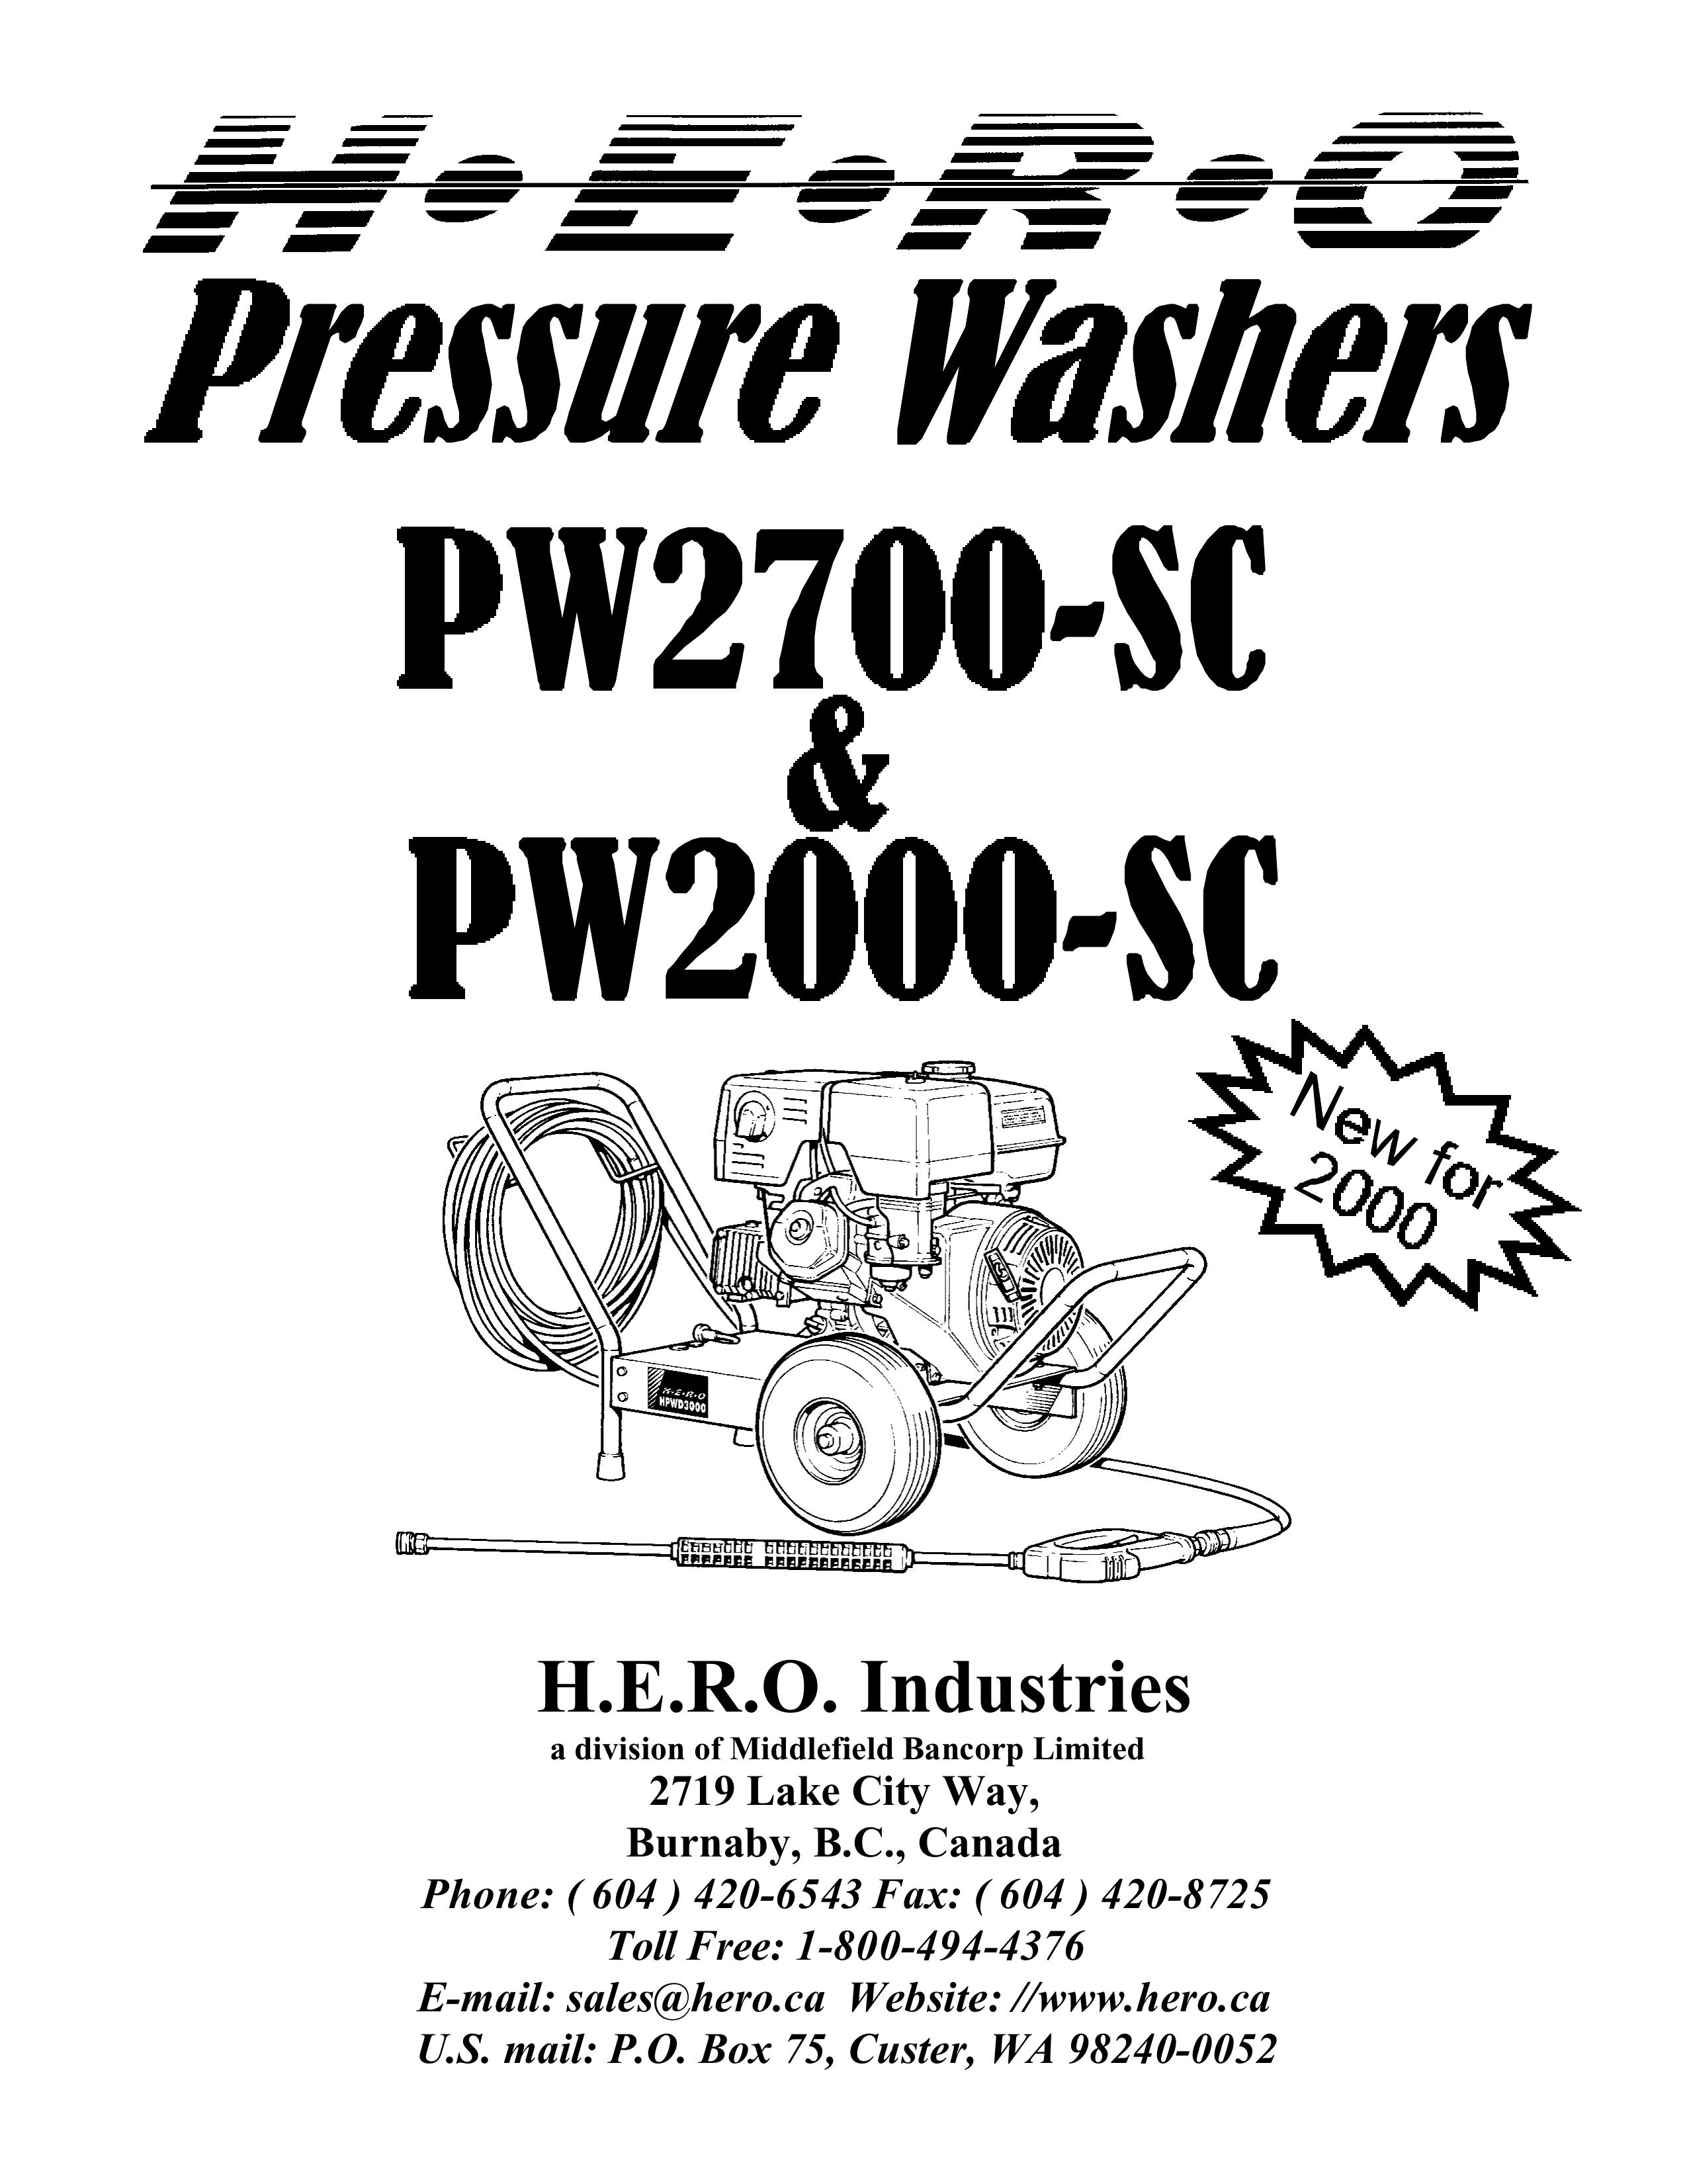 I.C.T.C. Holdings Corporation PW2000-SC Pressure Washer User Manual